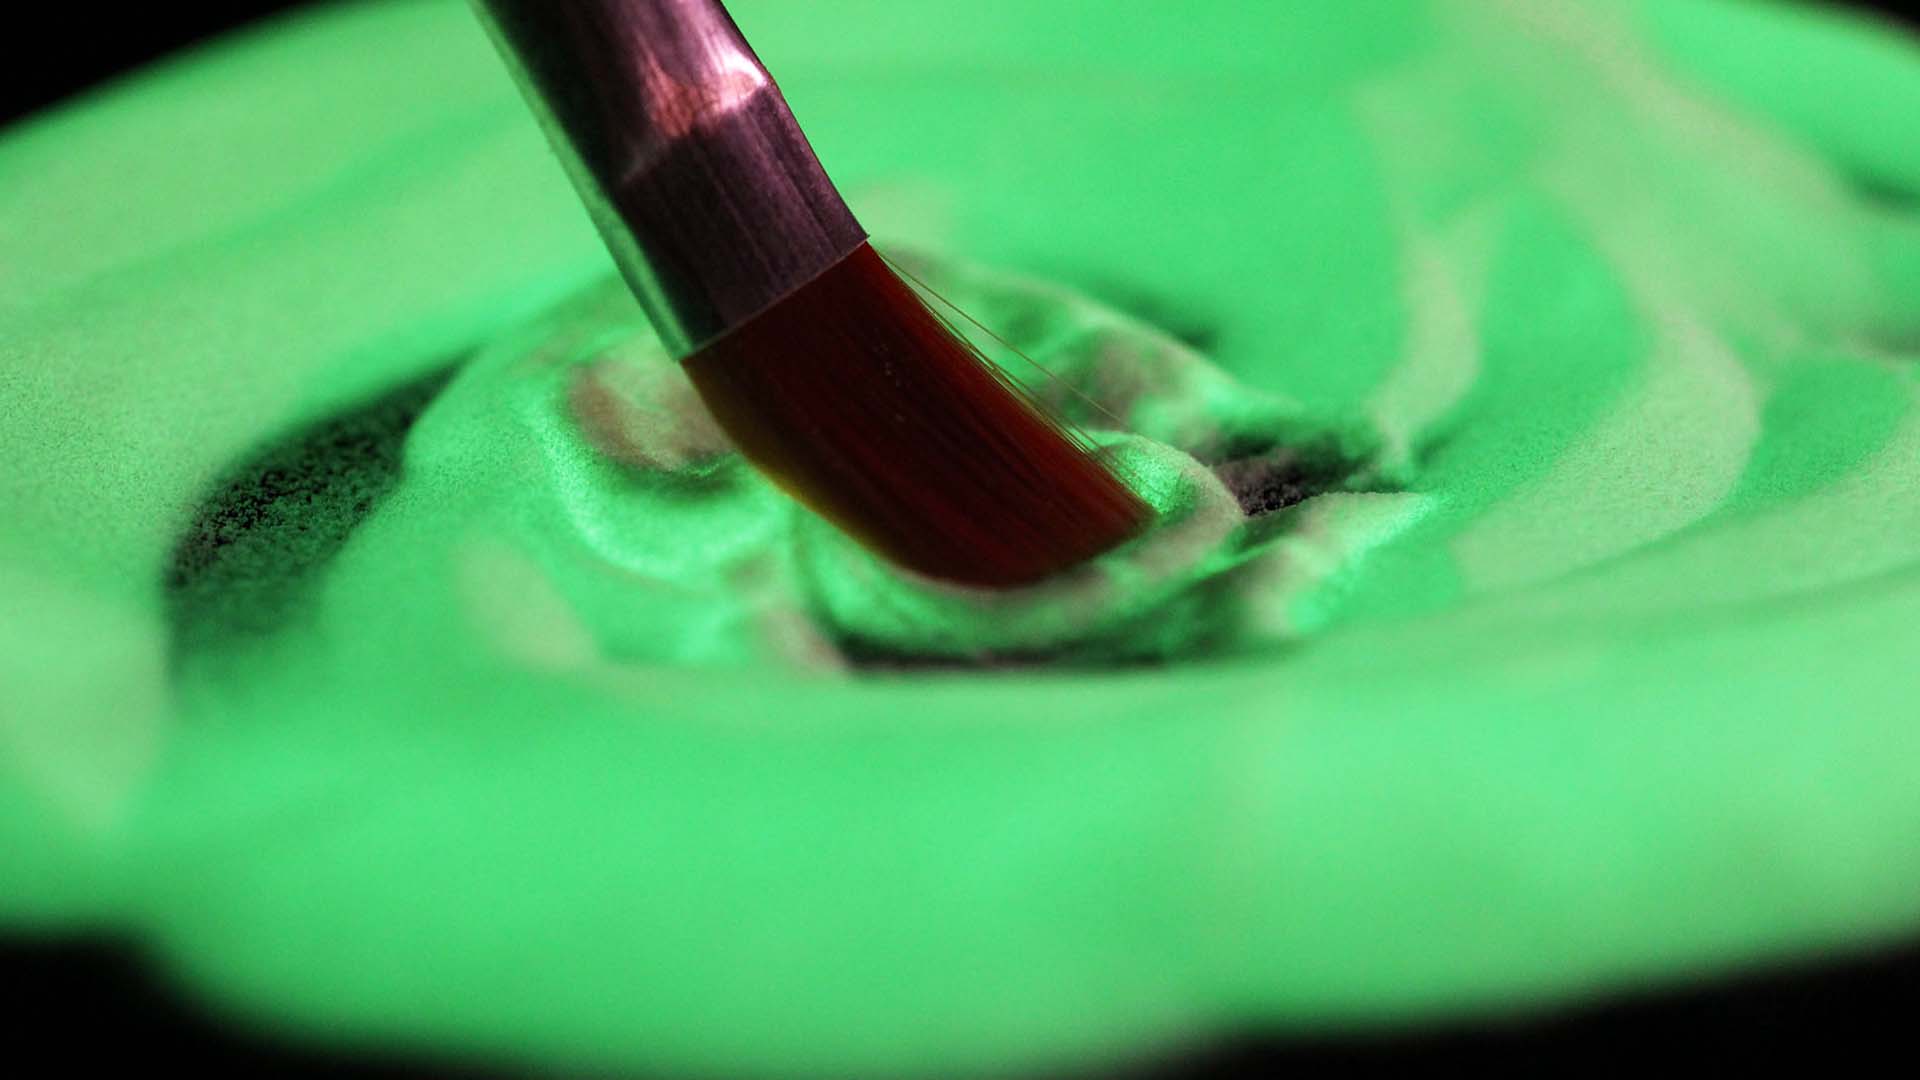 How does glow in the dark pigment work?